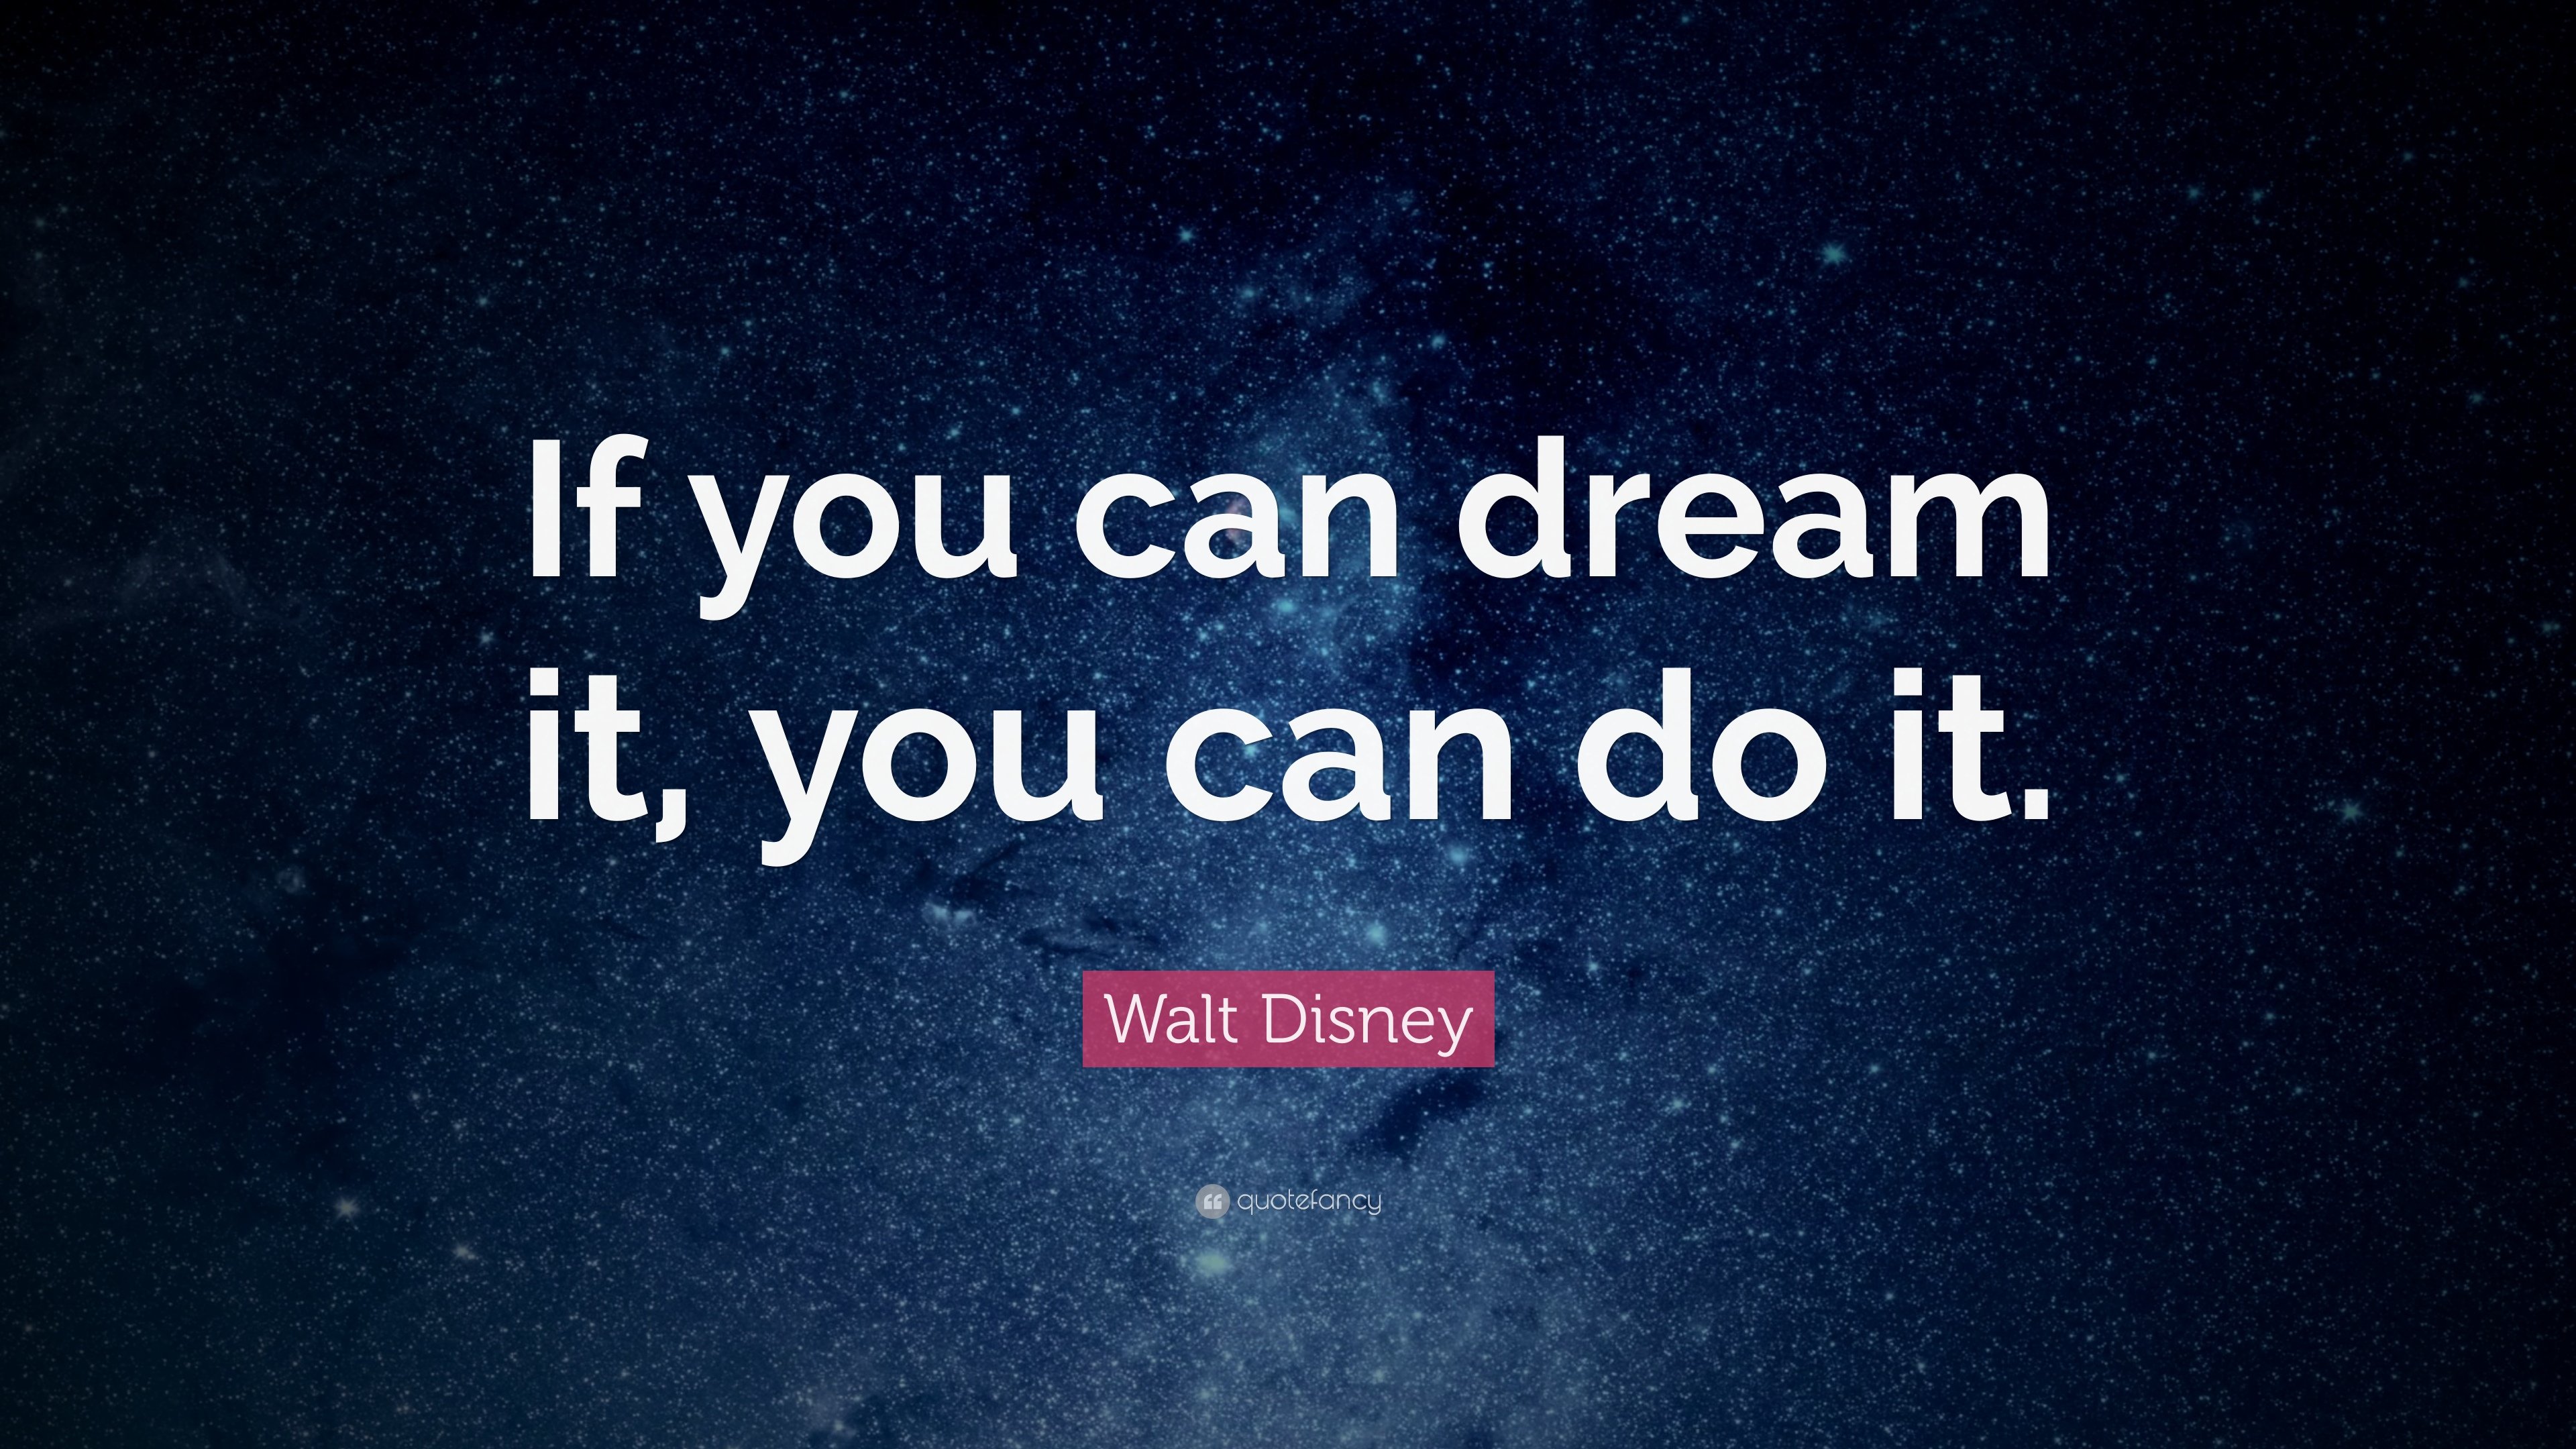 Walt Disney Quote: “If you can dream it, you can do it.” 28